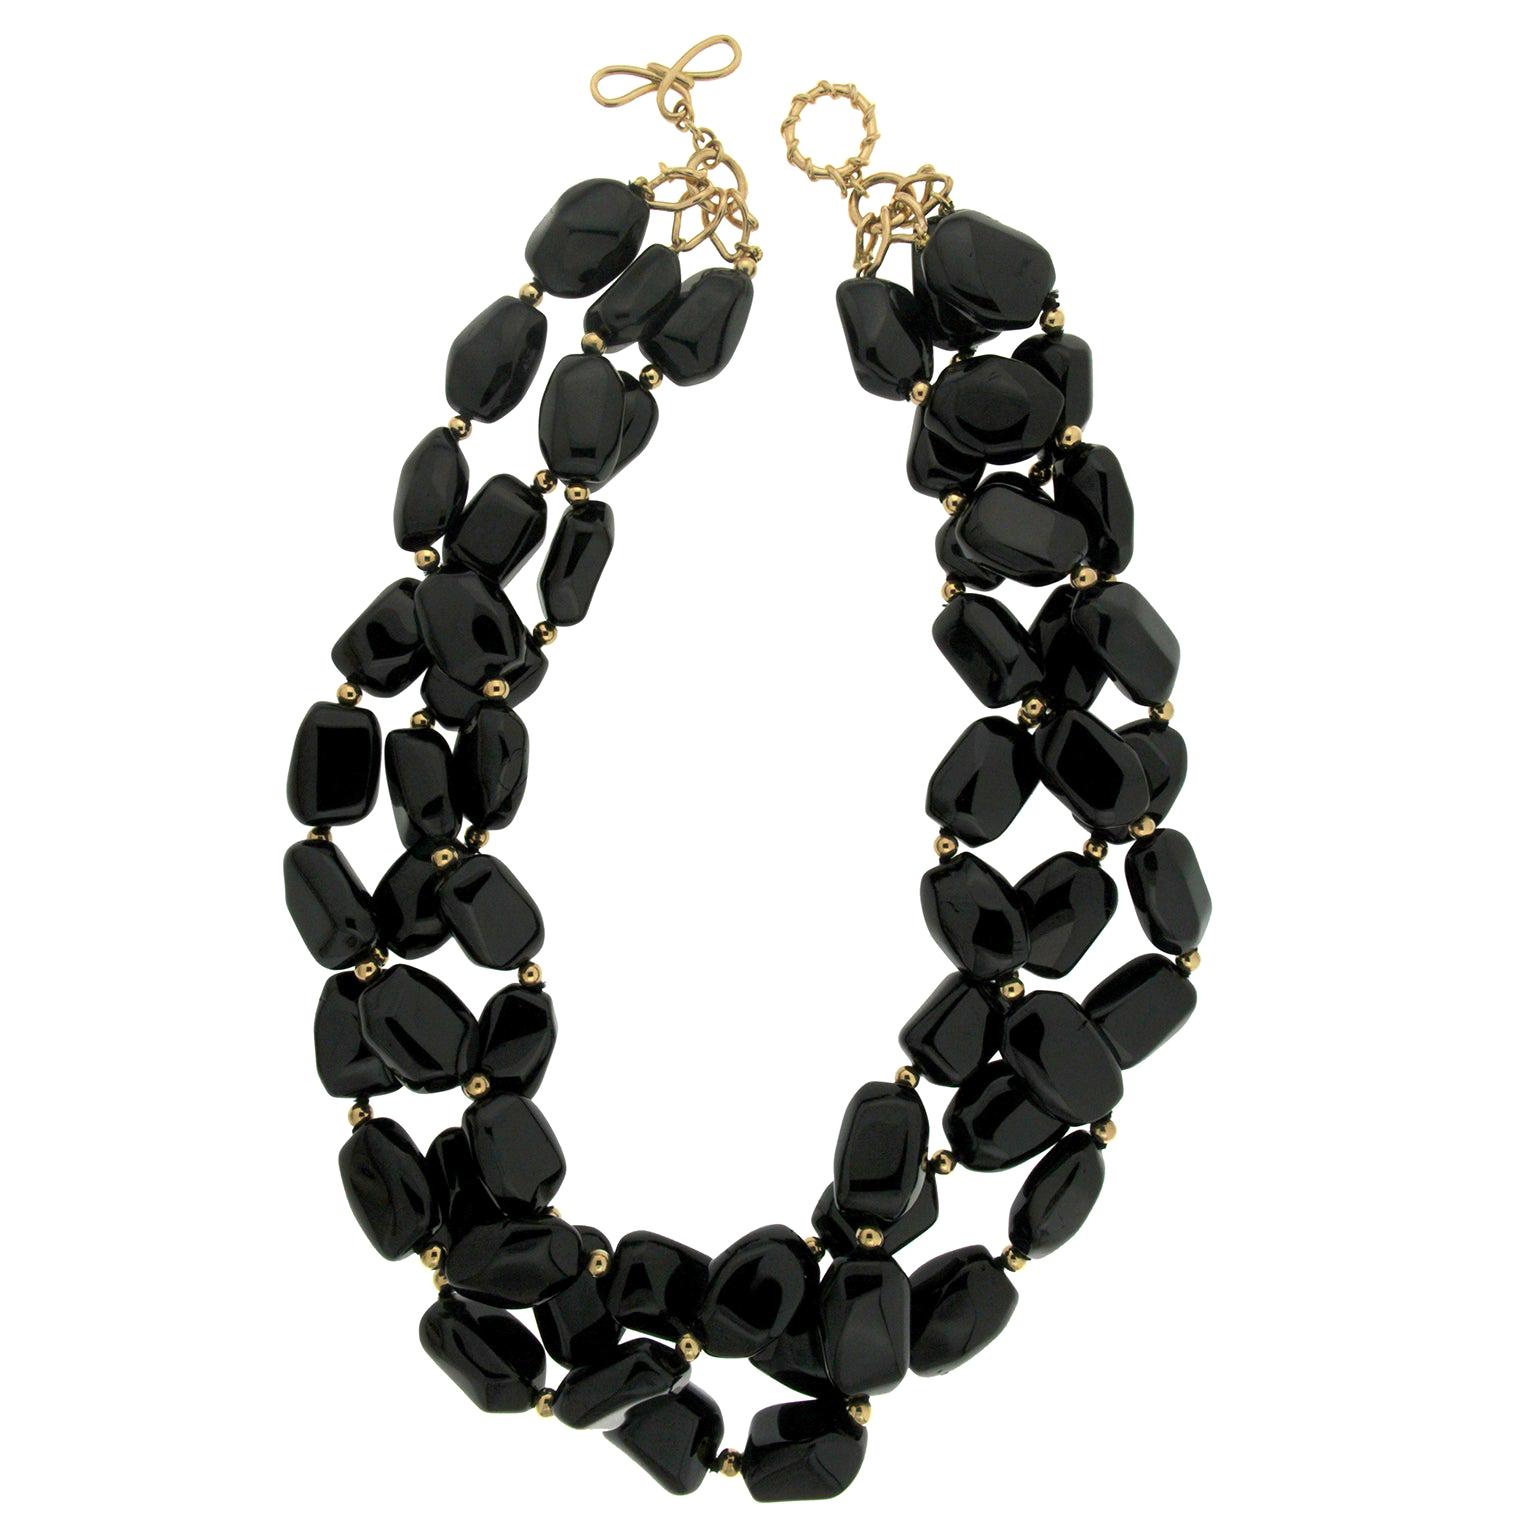 Chunky 3 Strand Graduated Faceted Black Crystal Beaded Necklace Layered 16.5 Long